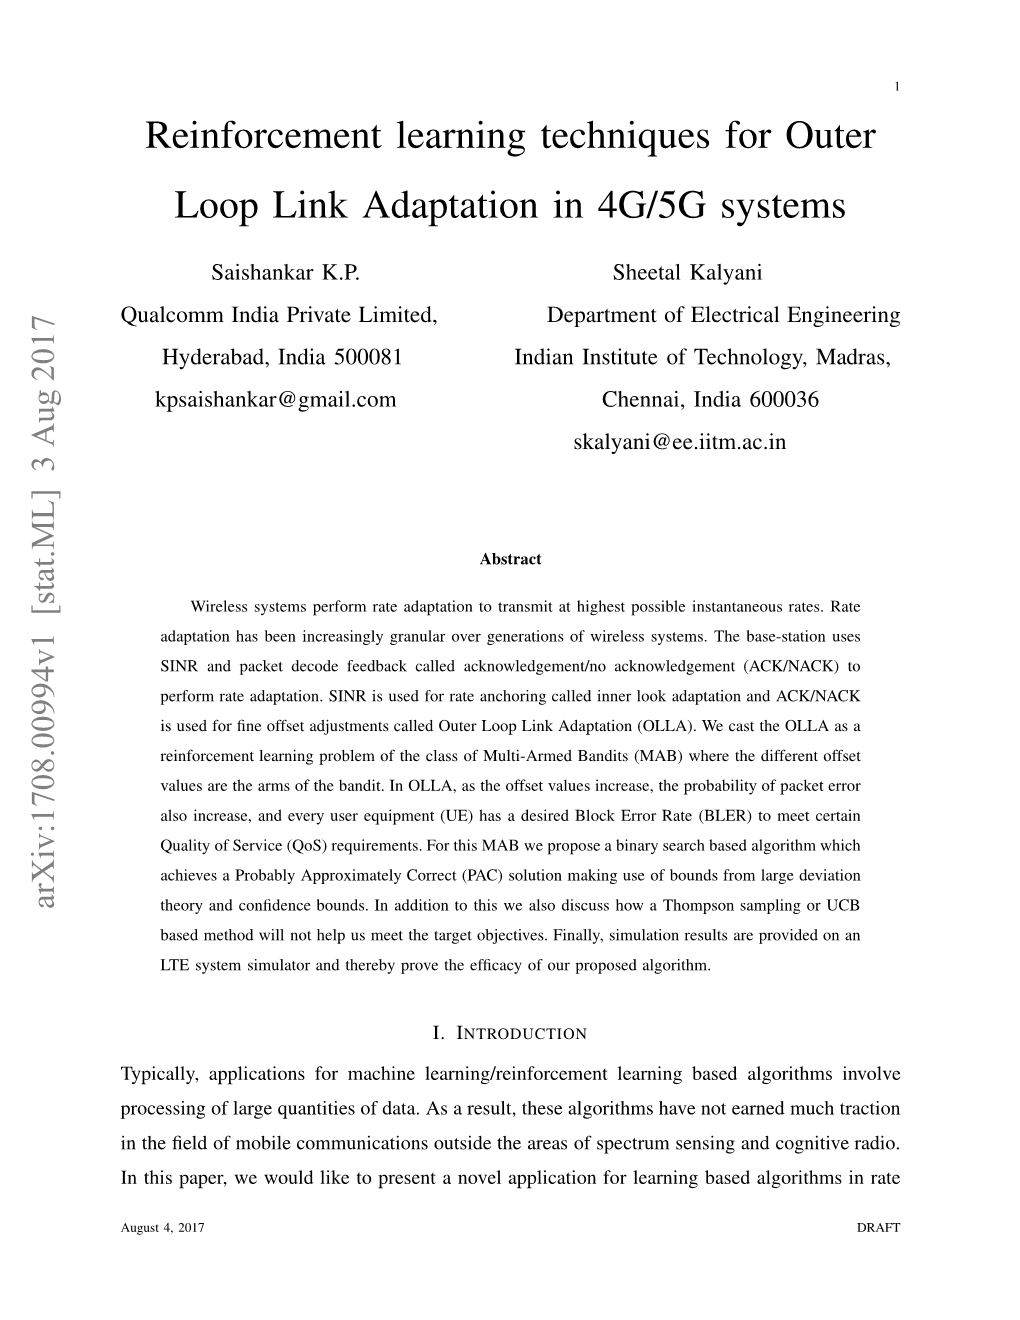 Reinforcement Learning Techniques for Outer Loop Link Adaptation in 4G